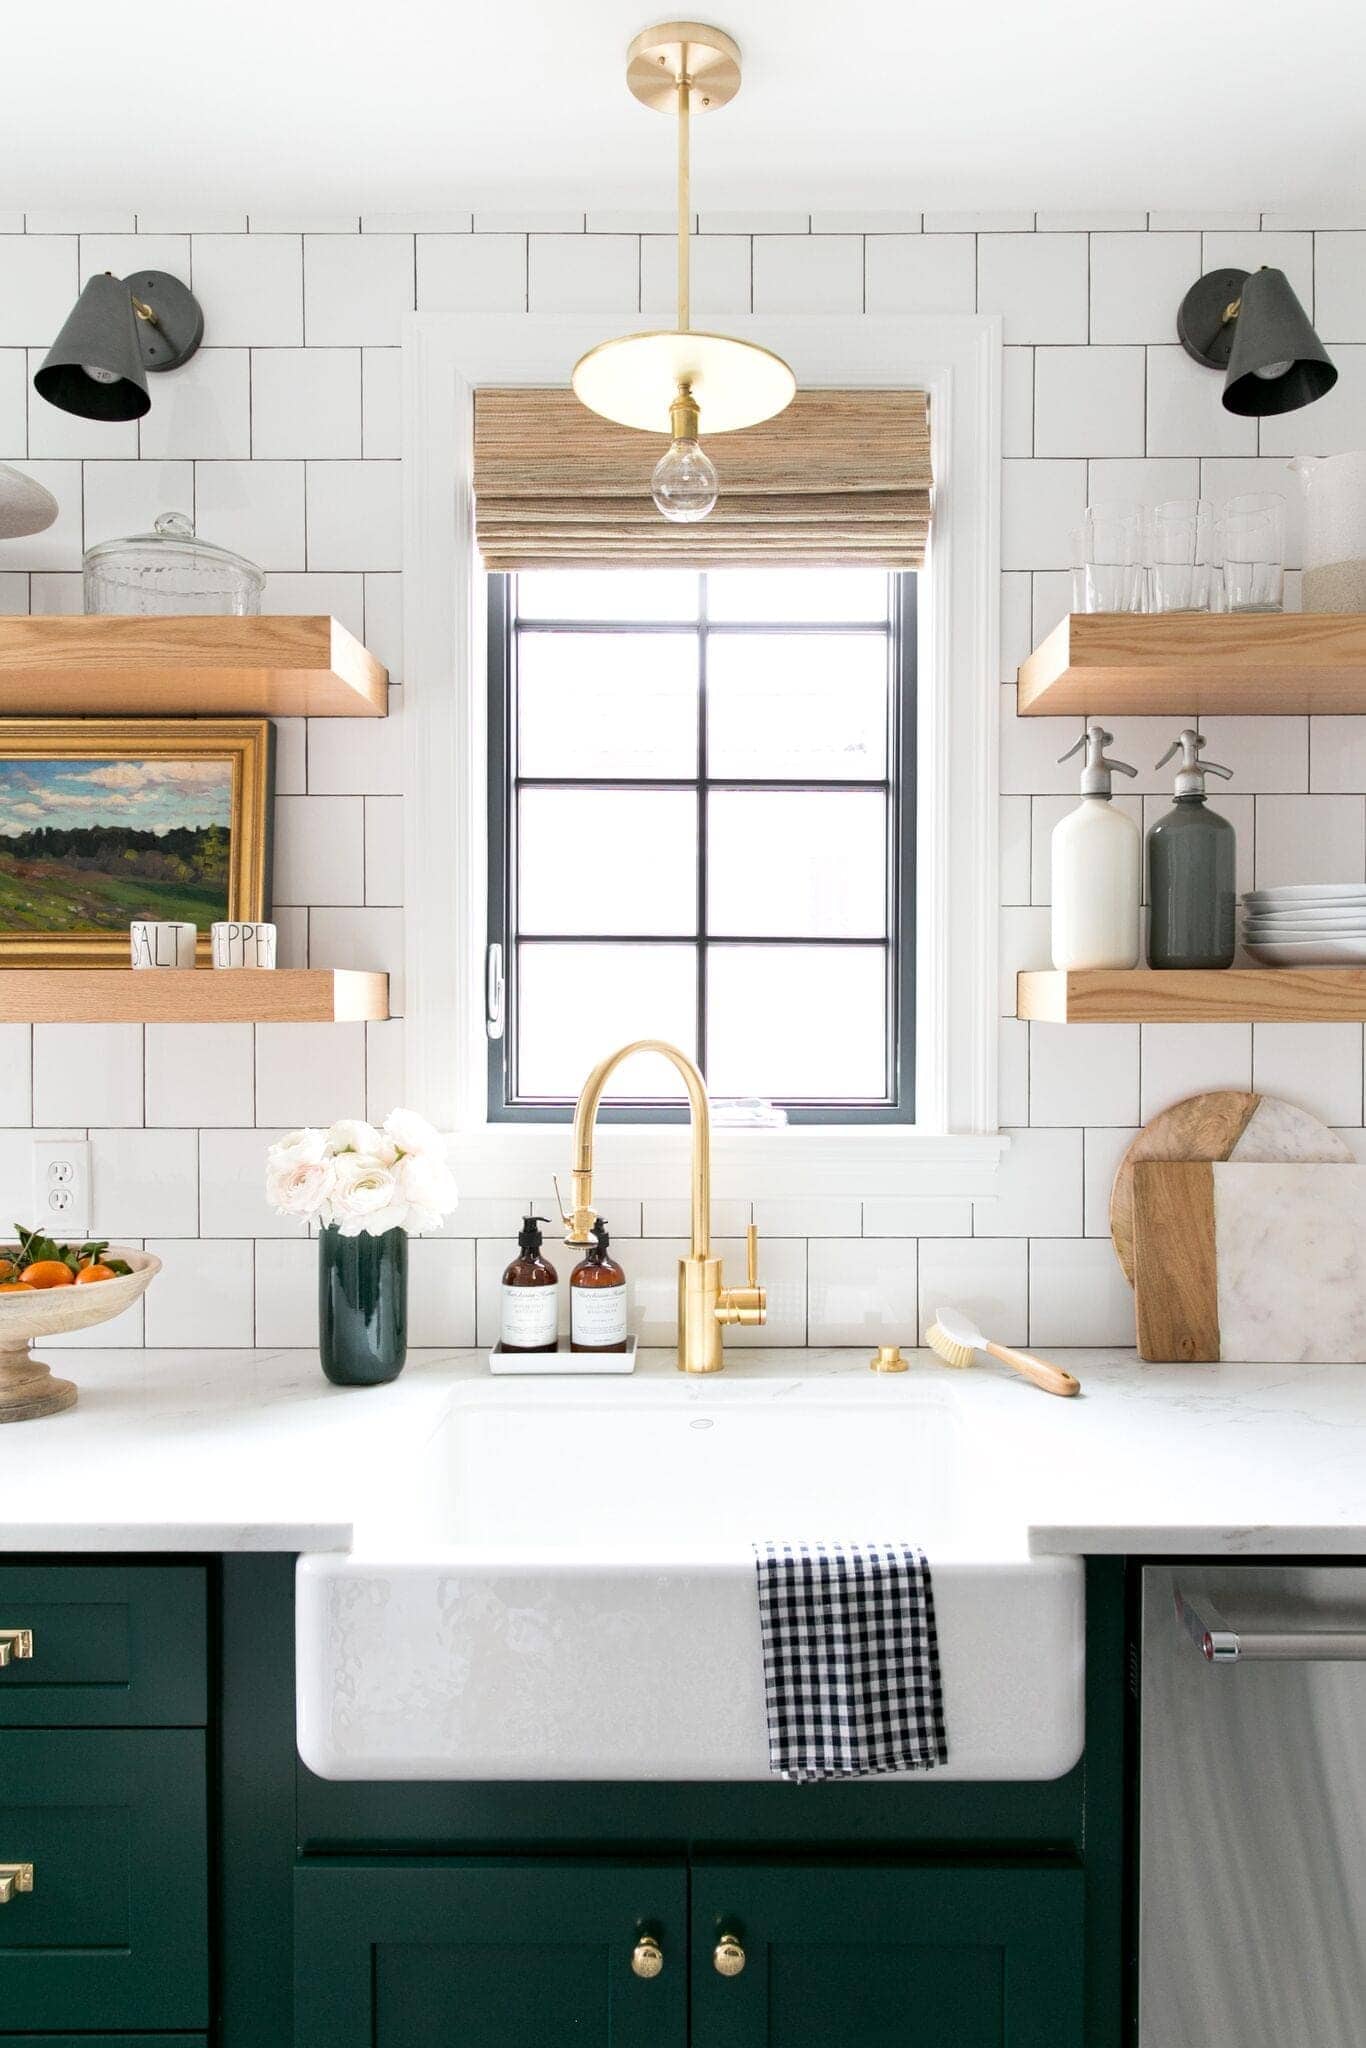 Pretty kitchen items are a must when styling a kitchen space. 